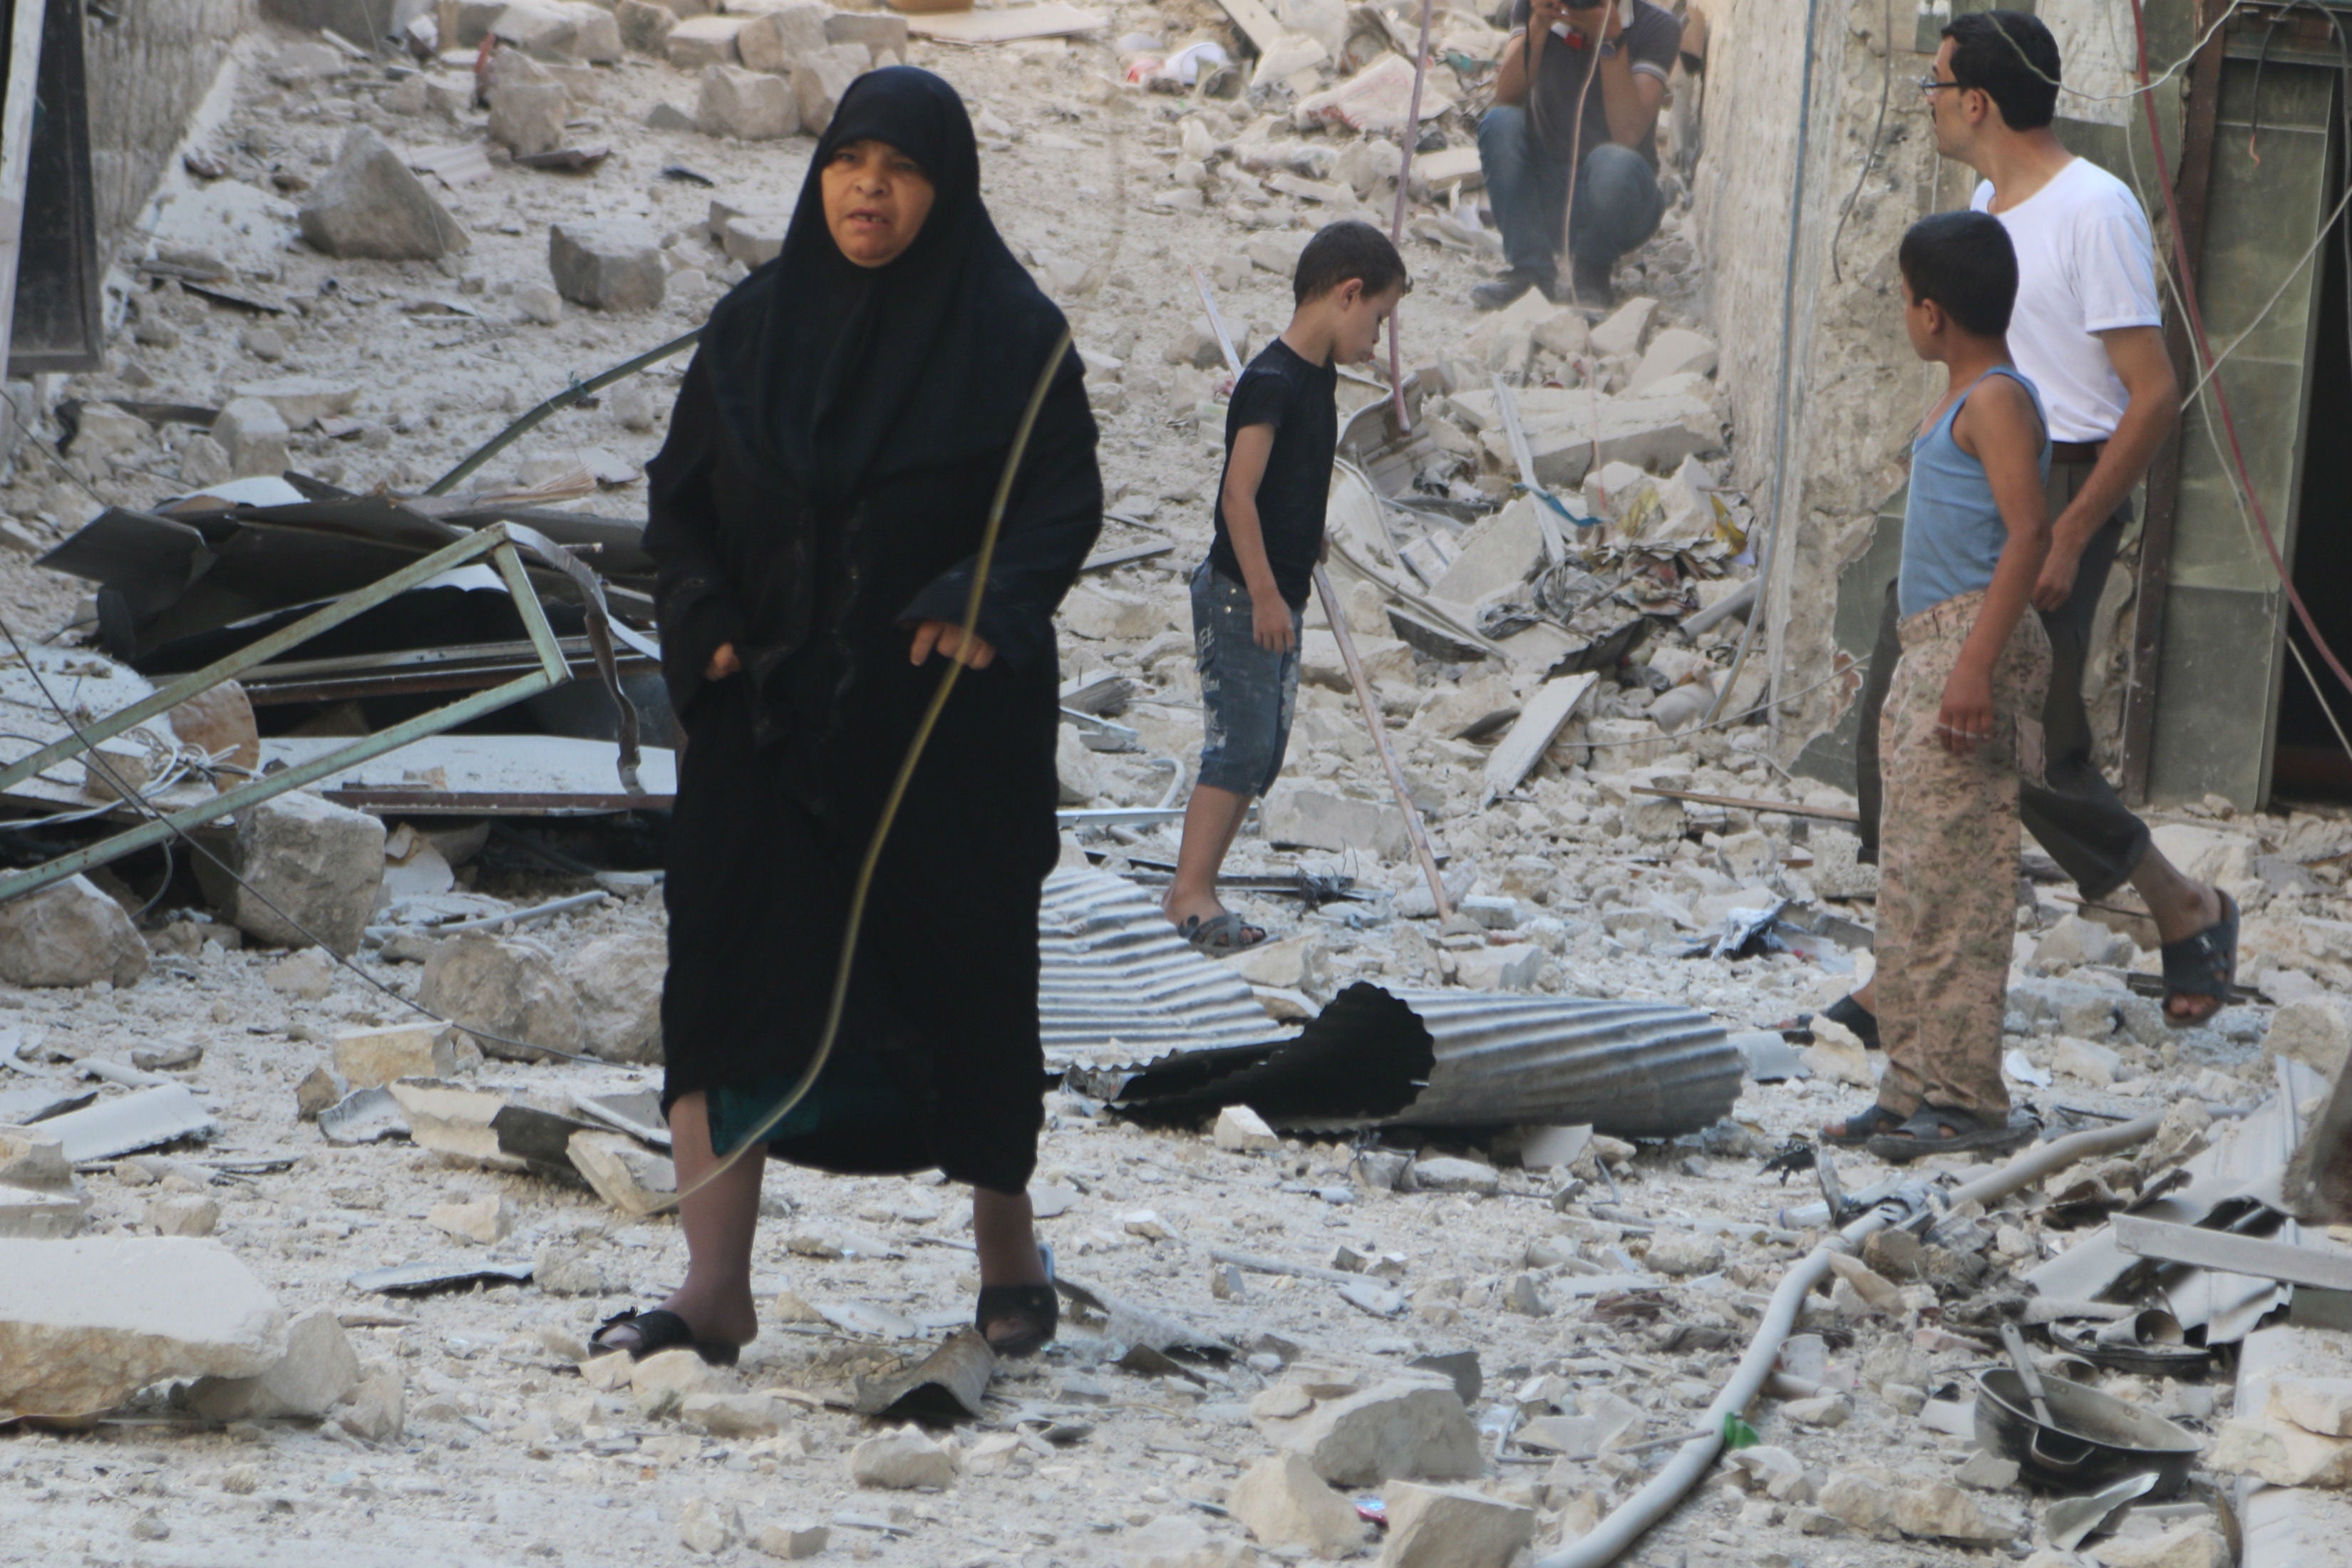 Civilians in Aleppo walk on rubble caused by barrel bomb dropped by forces loyal to President Bashar al-Assad